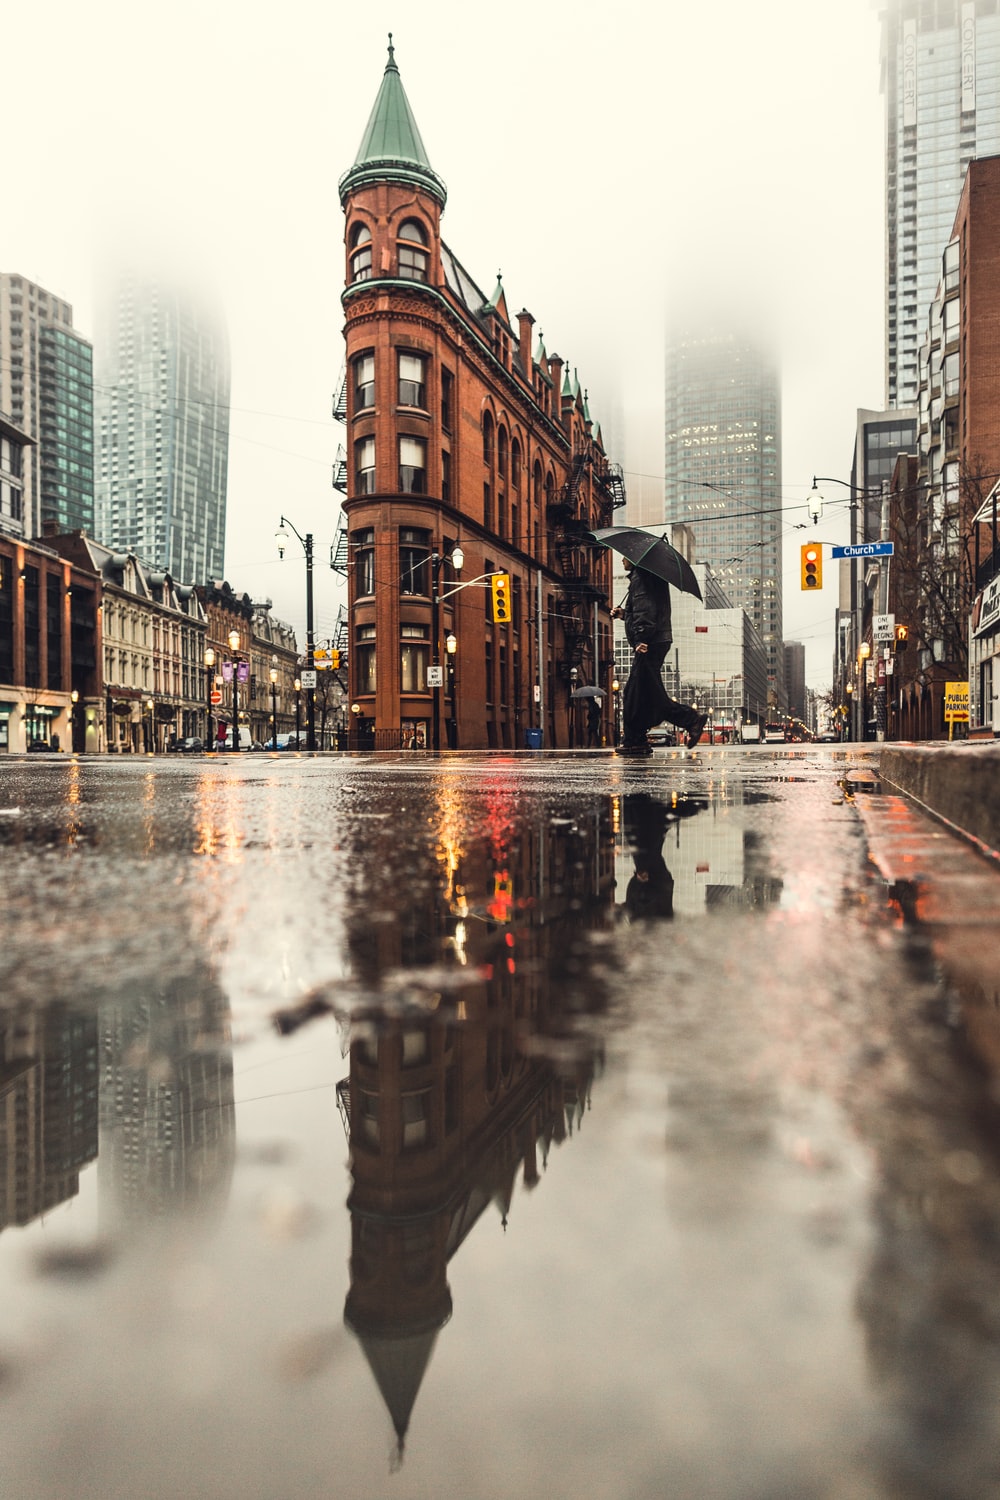 Rainy City Picture. Download Free Image